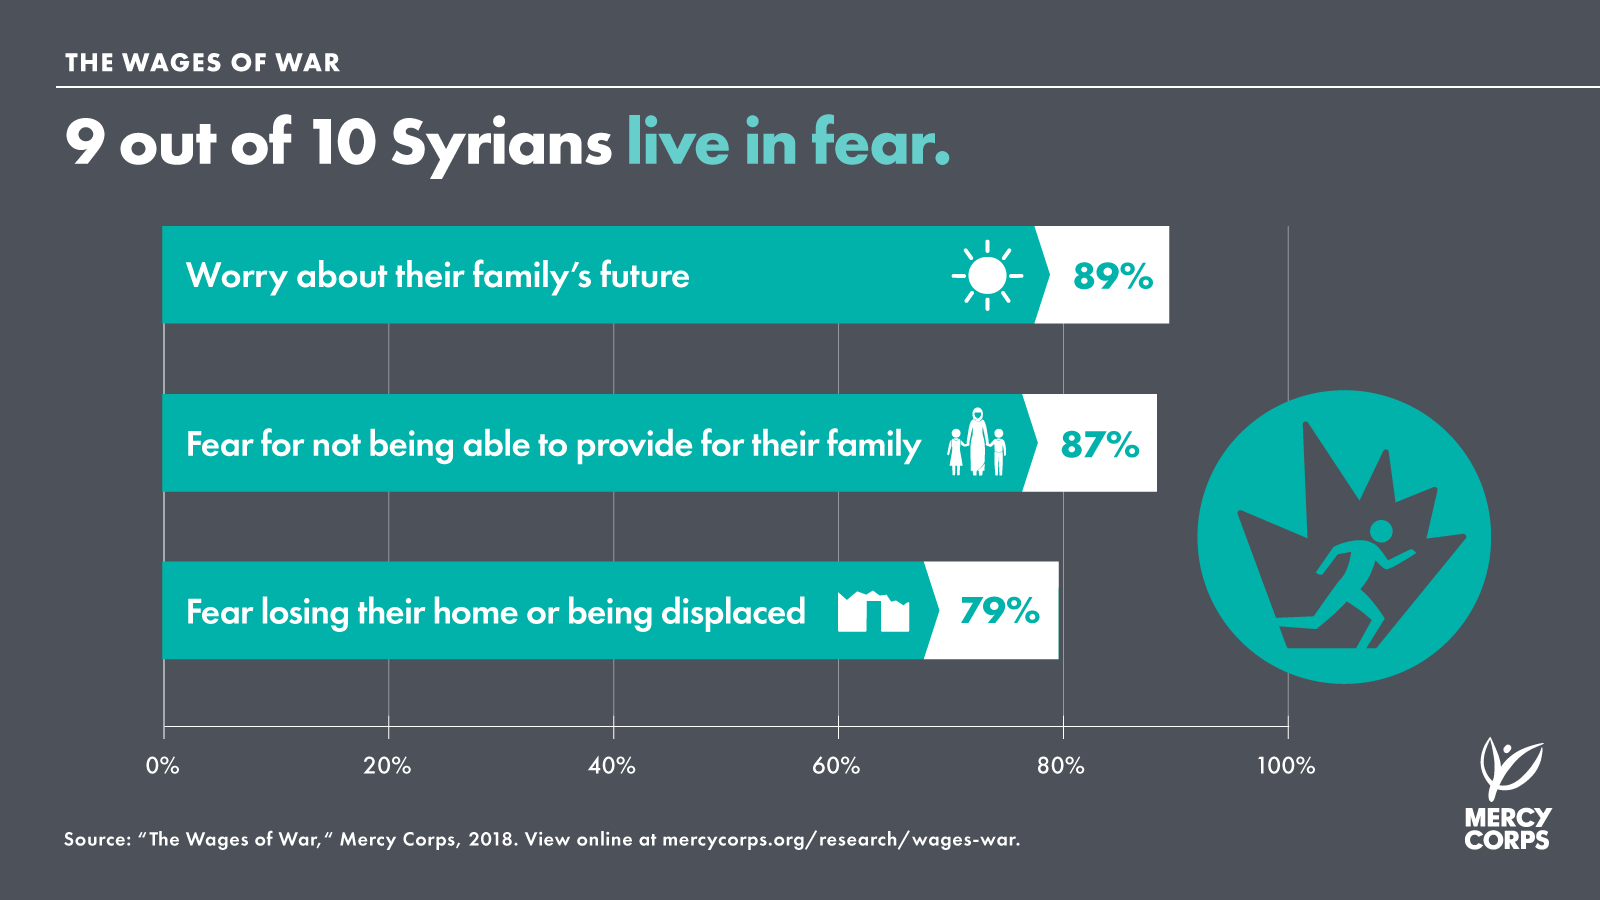 9 out of 10 Syrians live in fear.